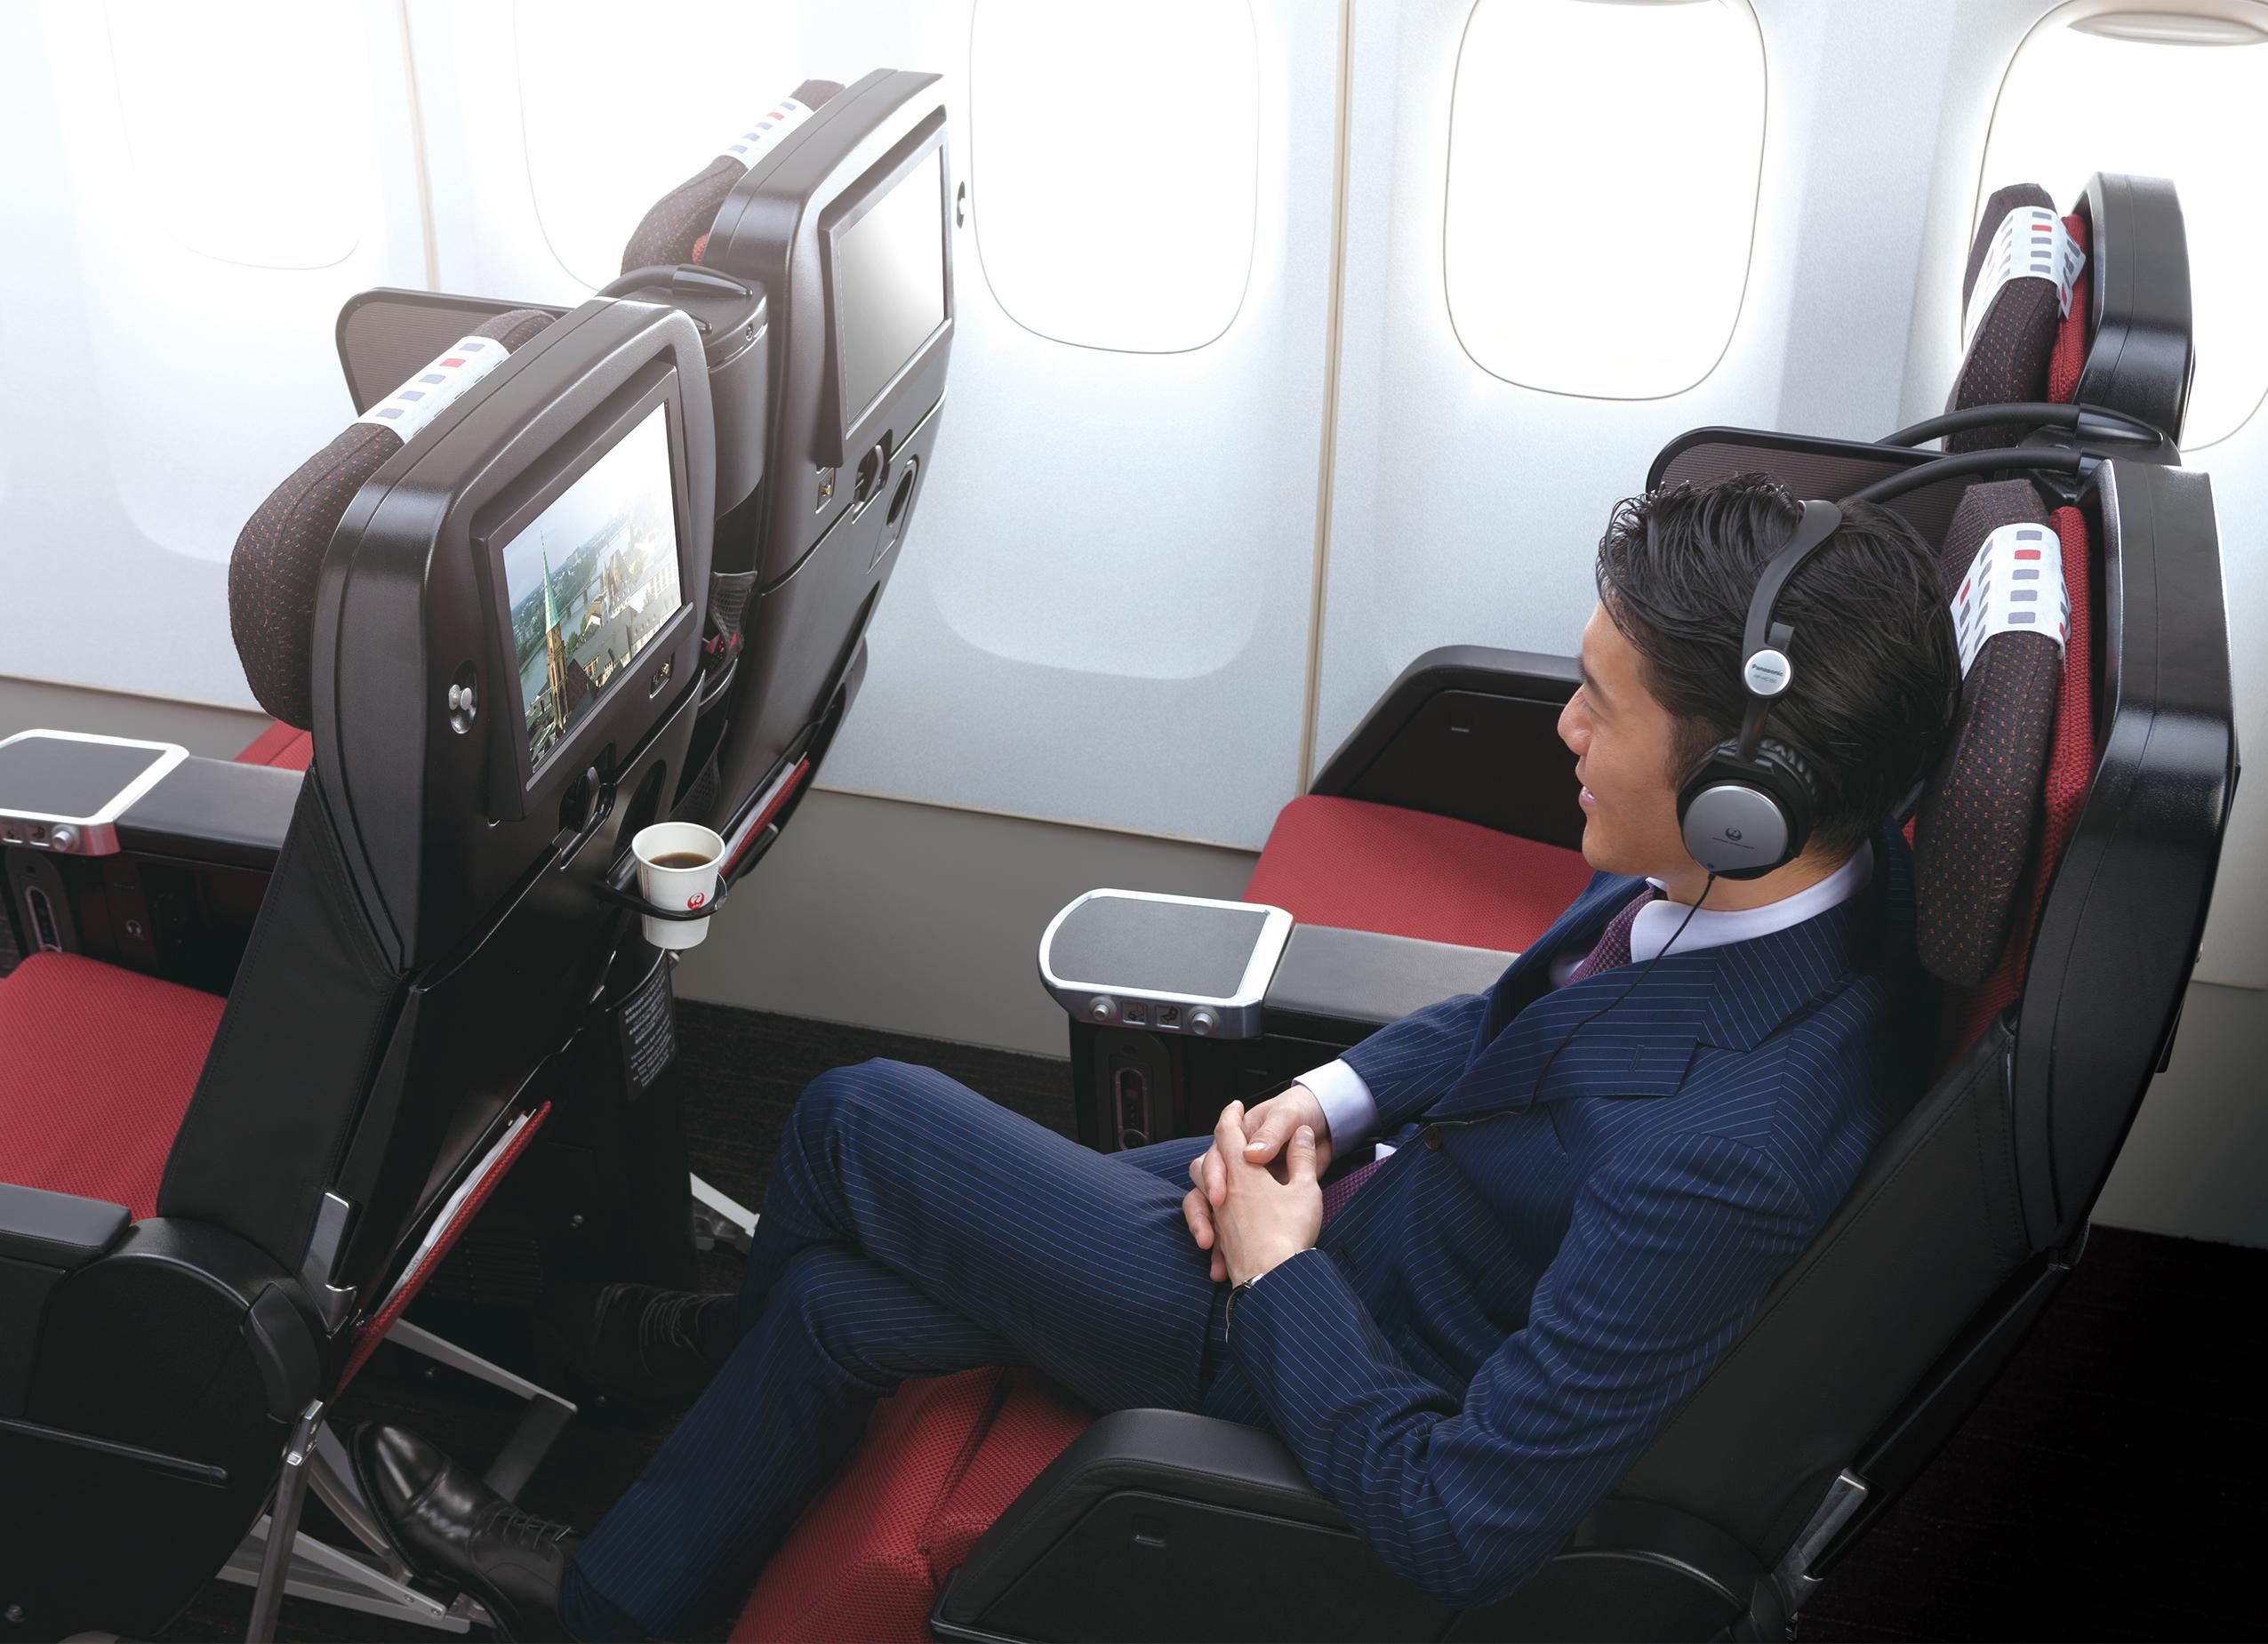 A passenger watching a movie in his seat in the JAL premium economy cabin.